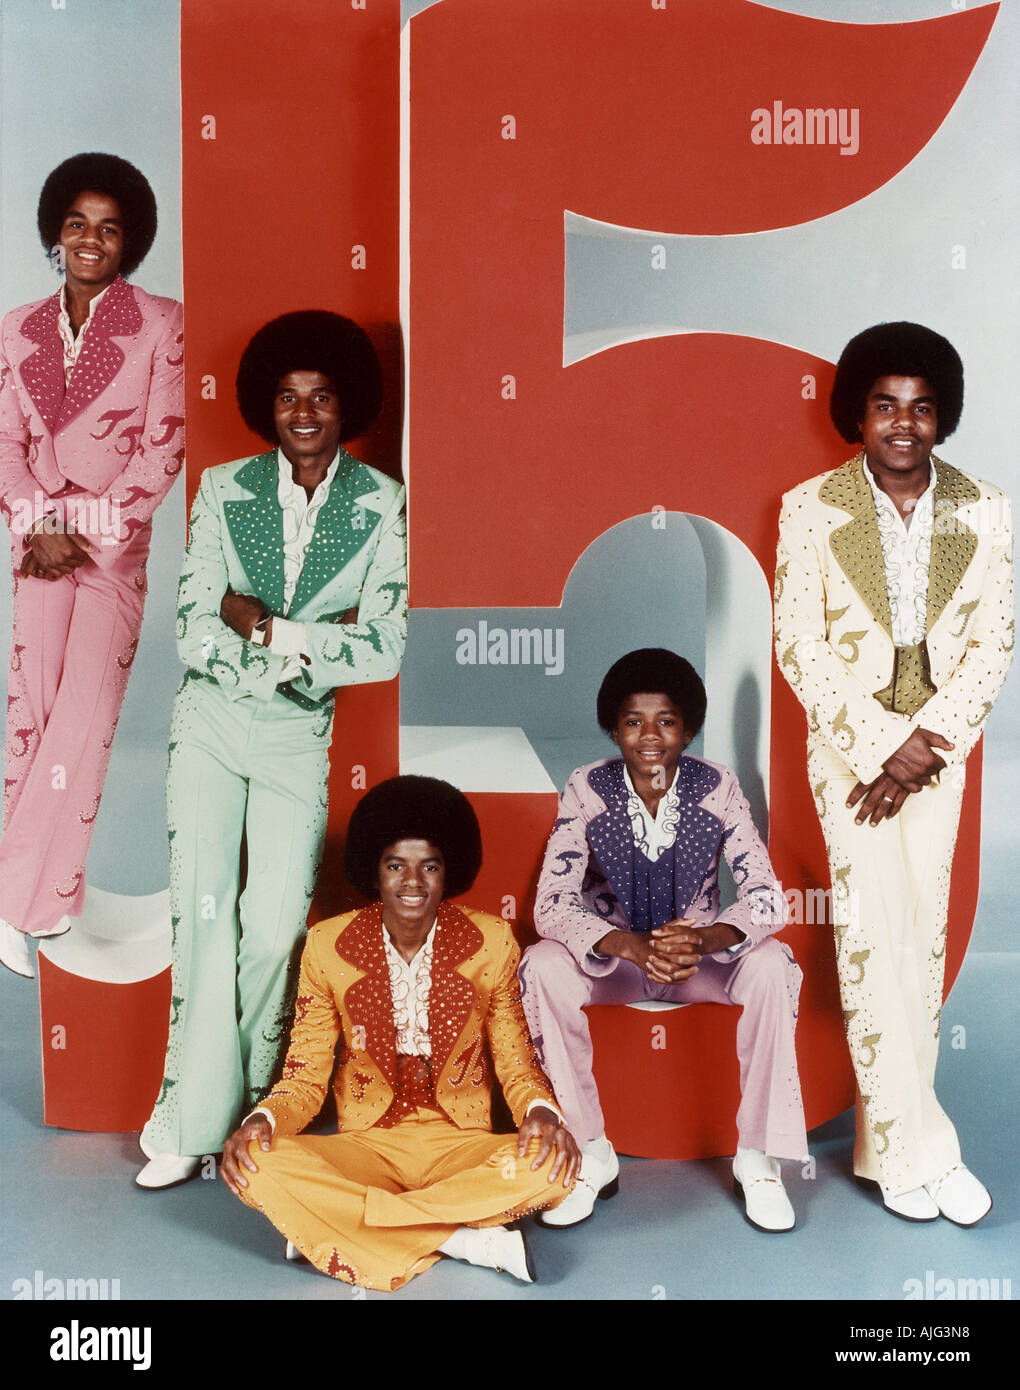 Jackson 5 Us Motown Group With Michael Jackson Seated In Yellow Suit Stock Photo Alamy